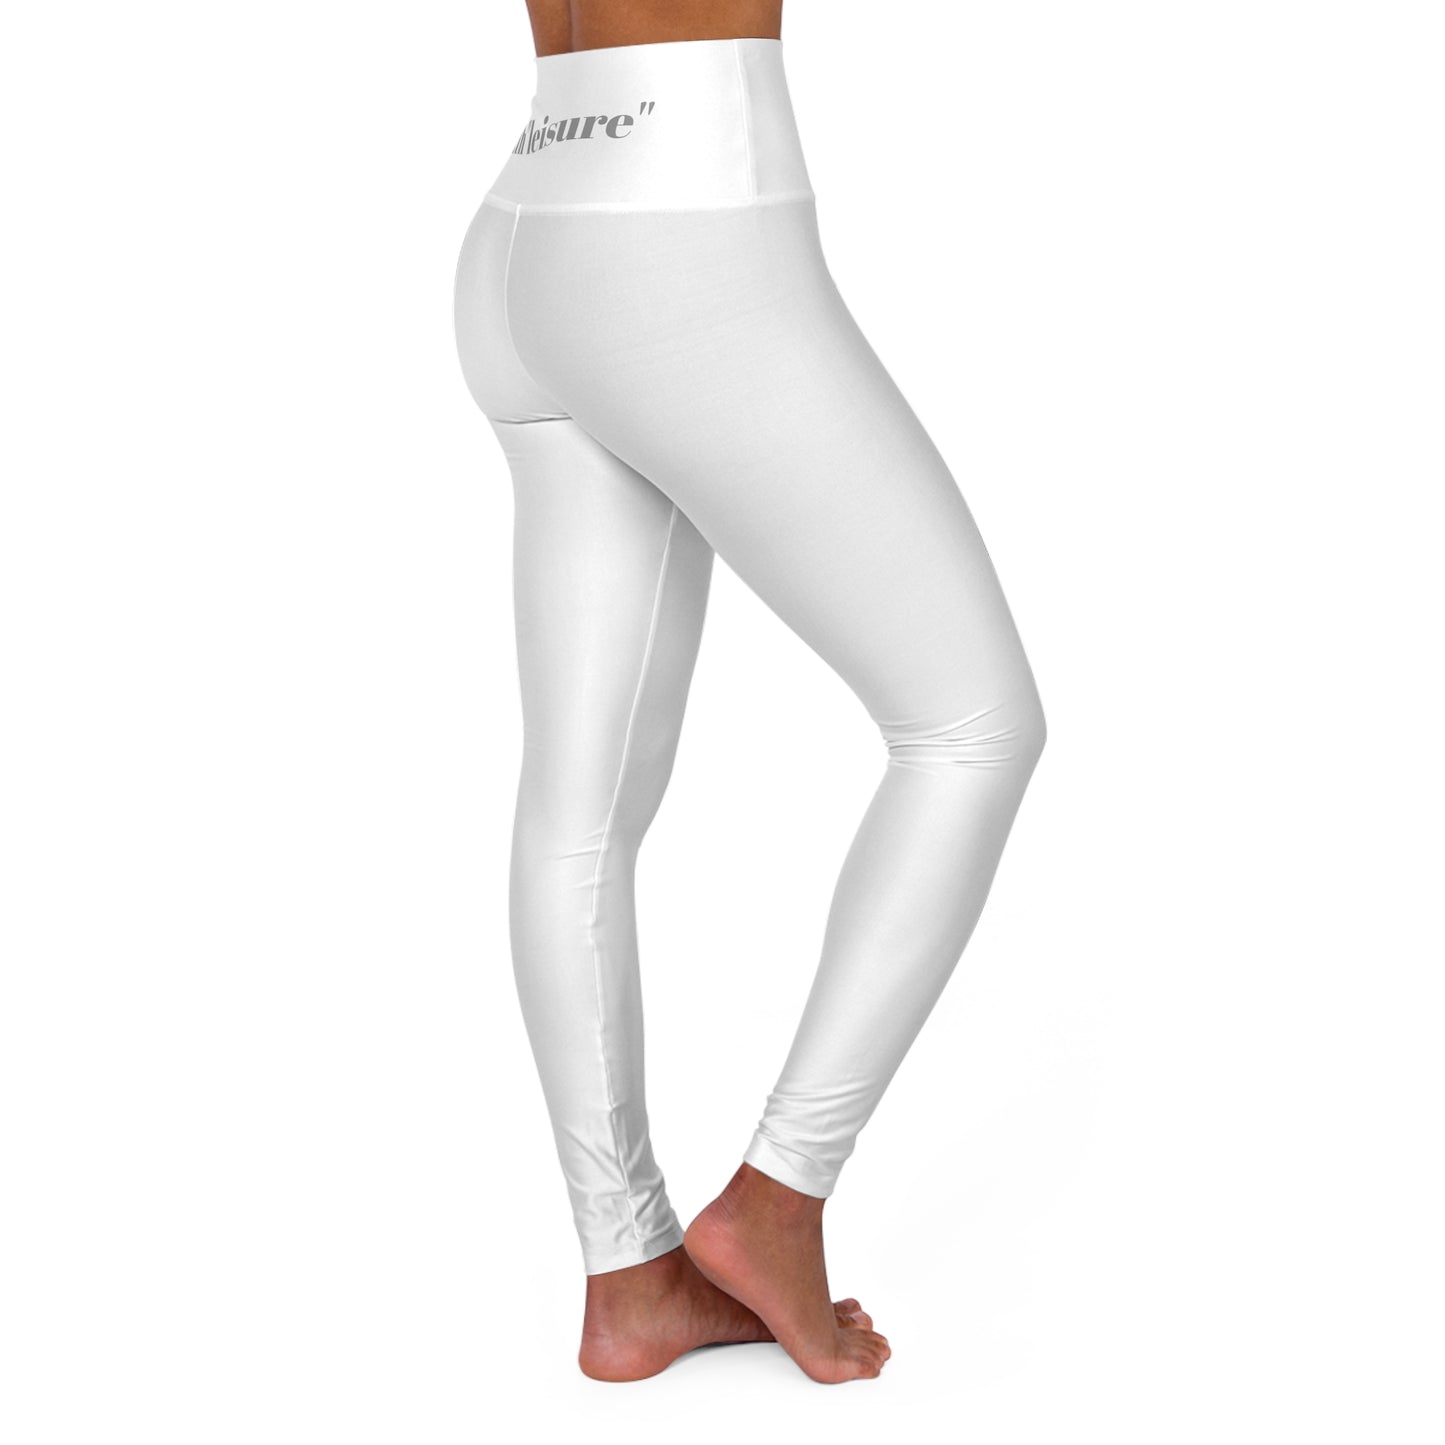 Ath"leisure" Collection- Ath"leisure" Women's High Waisted Yoga Leggings